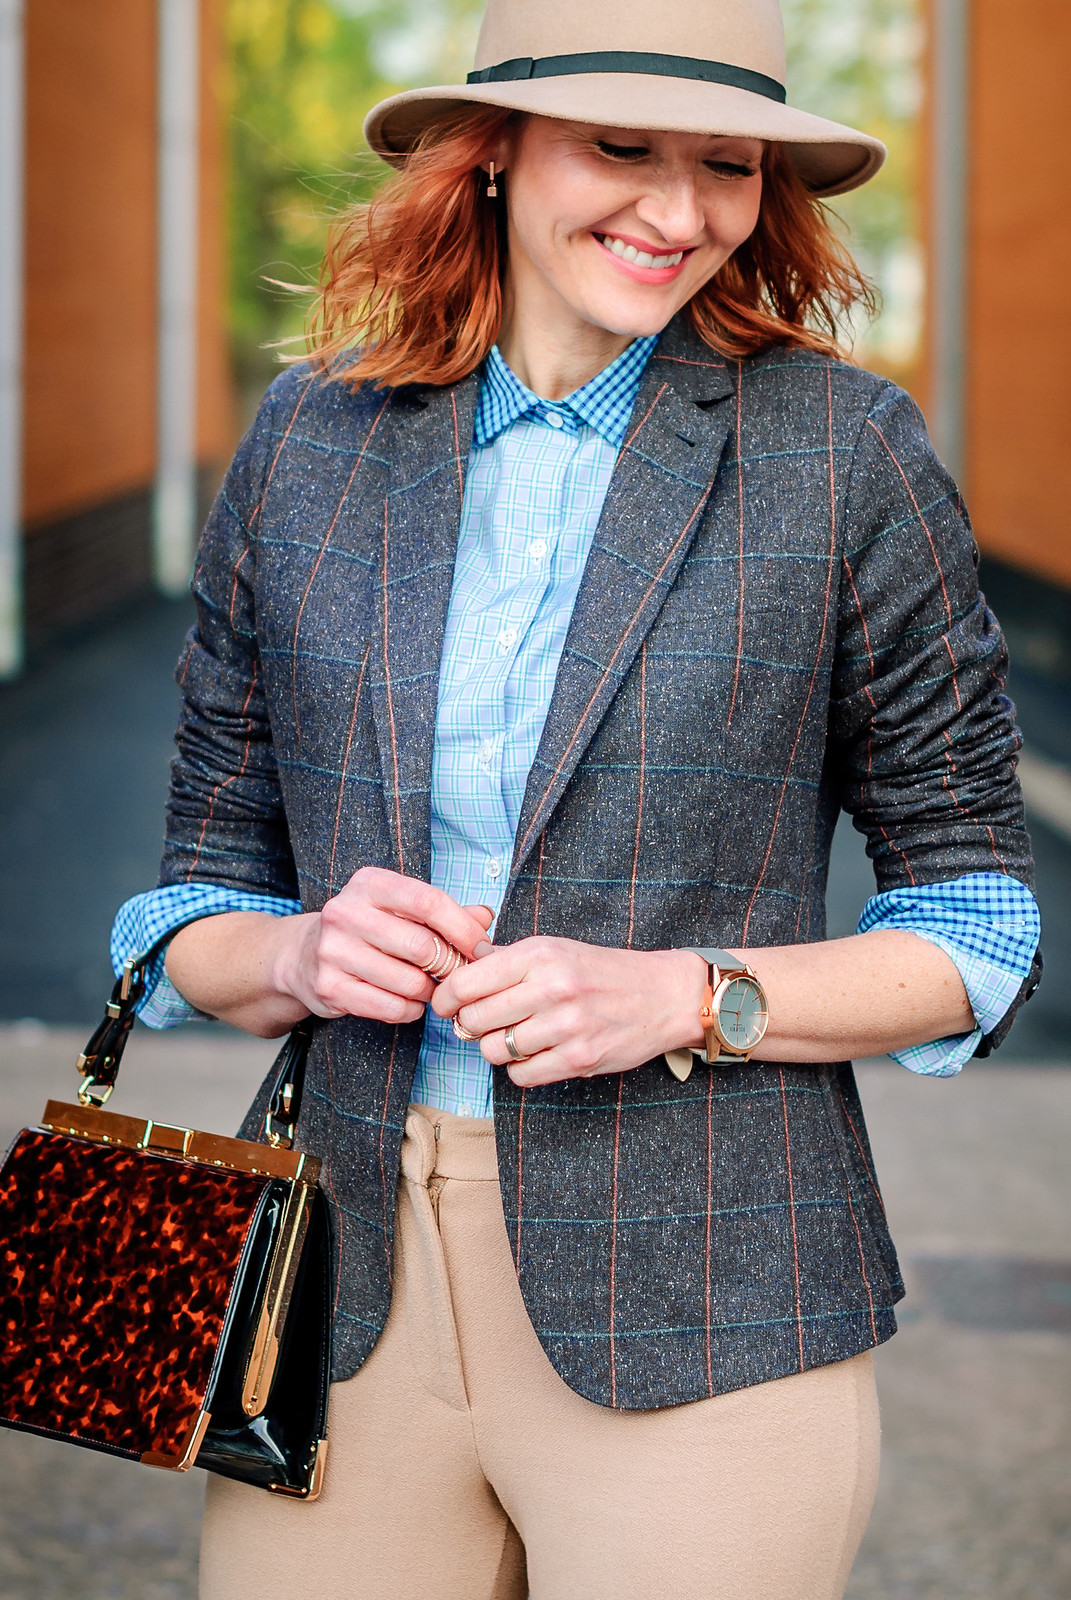 Smart British tailoring by Arthur Shirtley: Check shirt tweed silk blazer camel wide leg trousers silver slip on sneakers tortoiseshell bag camel fedora | Not Dressed As Lamb, over 40 style